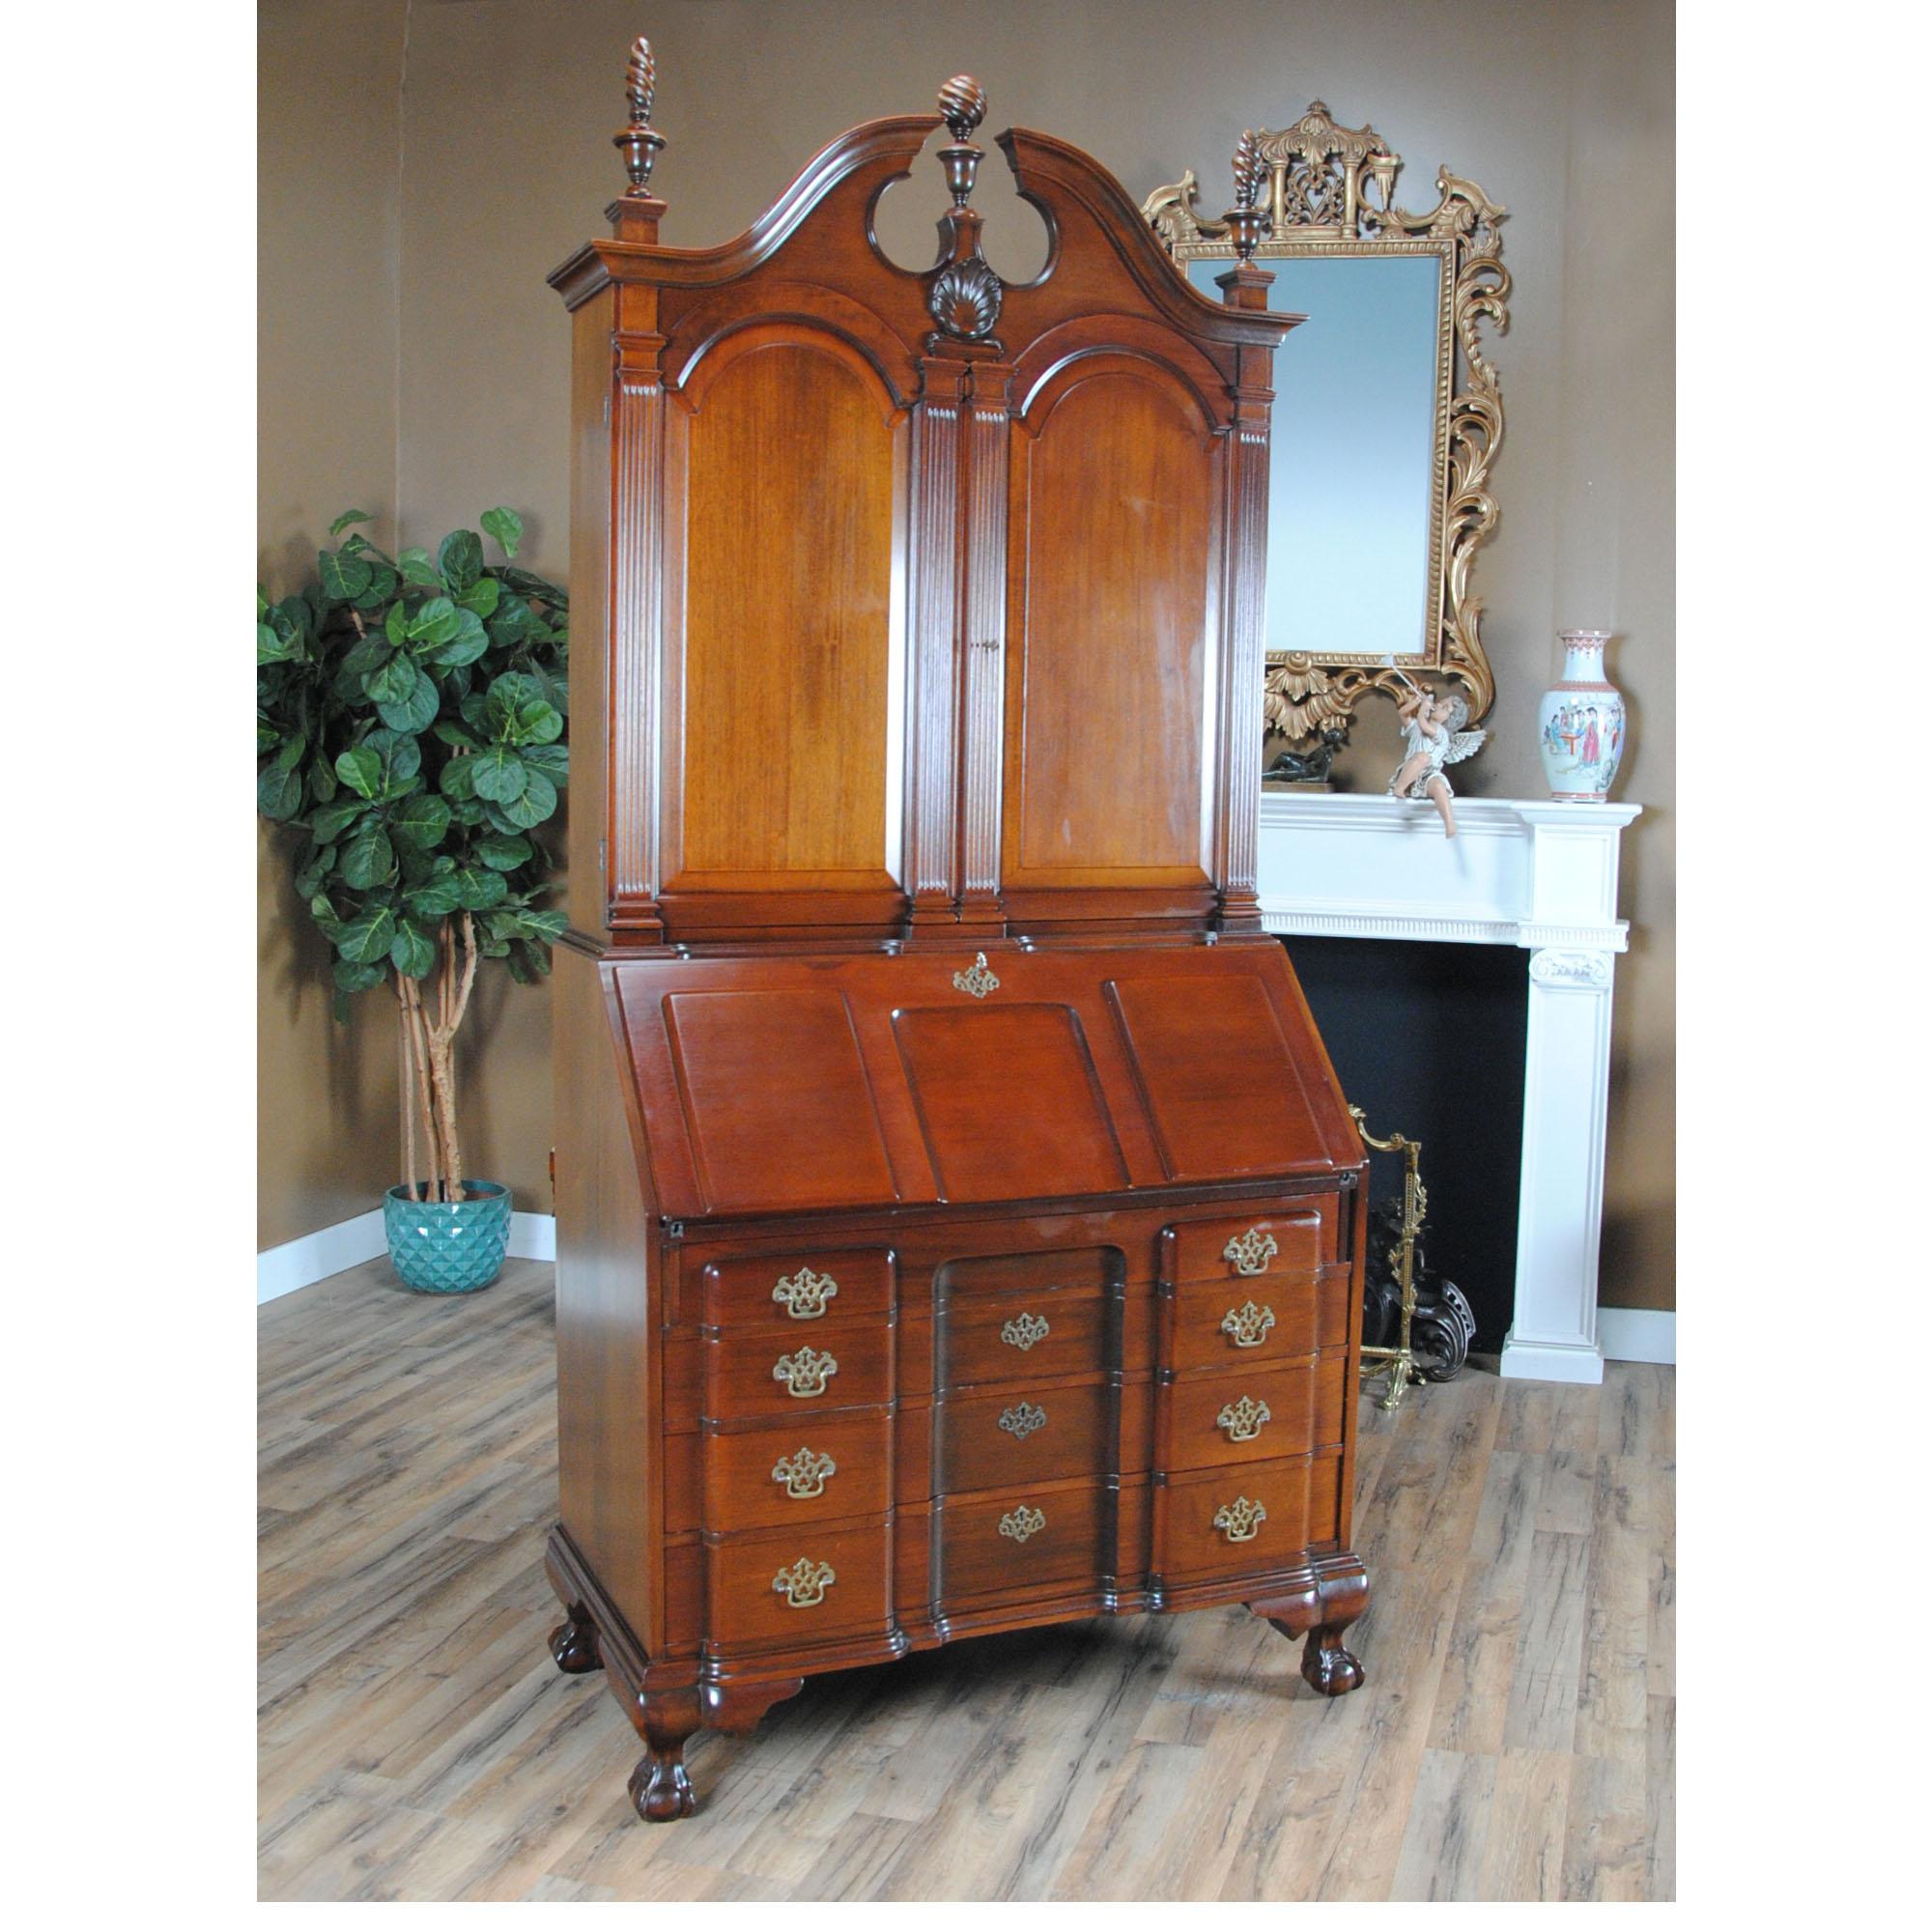 A Vintage large mahogany secretary desk. This desk is impressive in both it’s design and scale. Made of beautifully grained solid mahogany, the bookcase features removable finials as well as adjustable shelves in the interior of the cabinet. The top